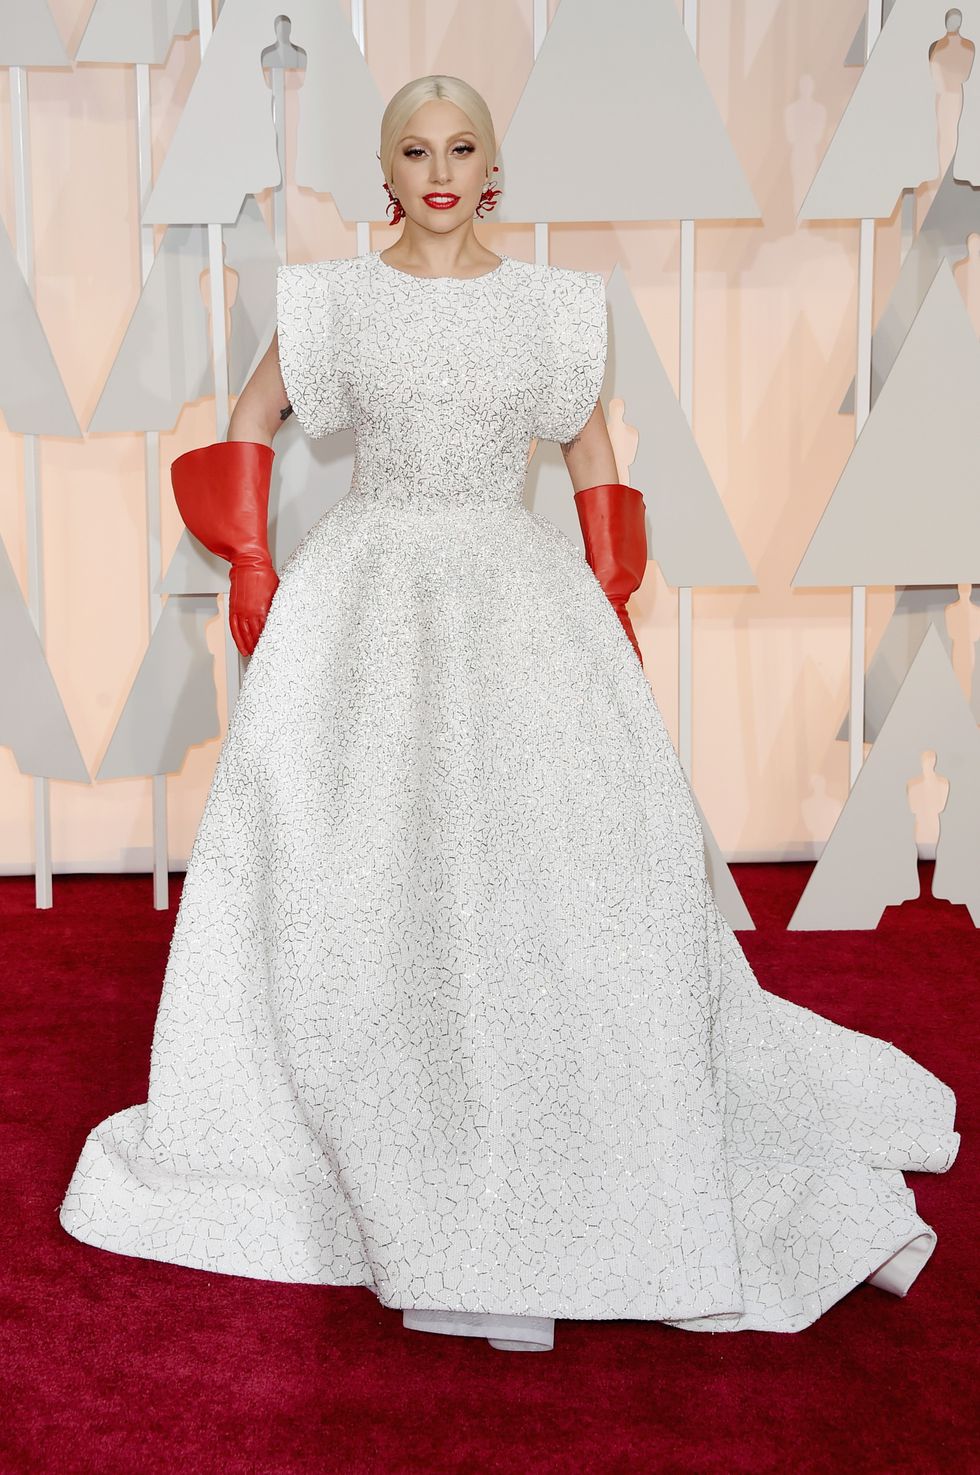 Lady Gaga on the red carpet at the 2015 Oscars